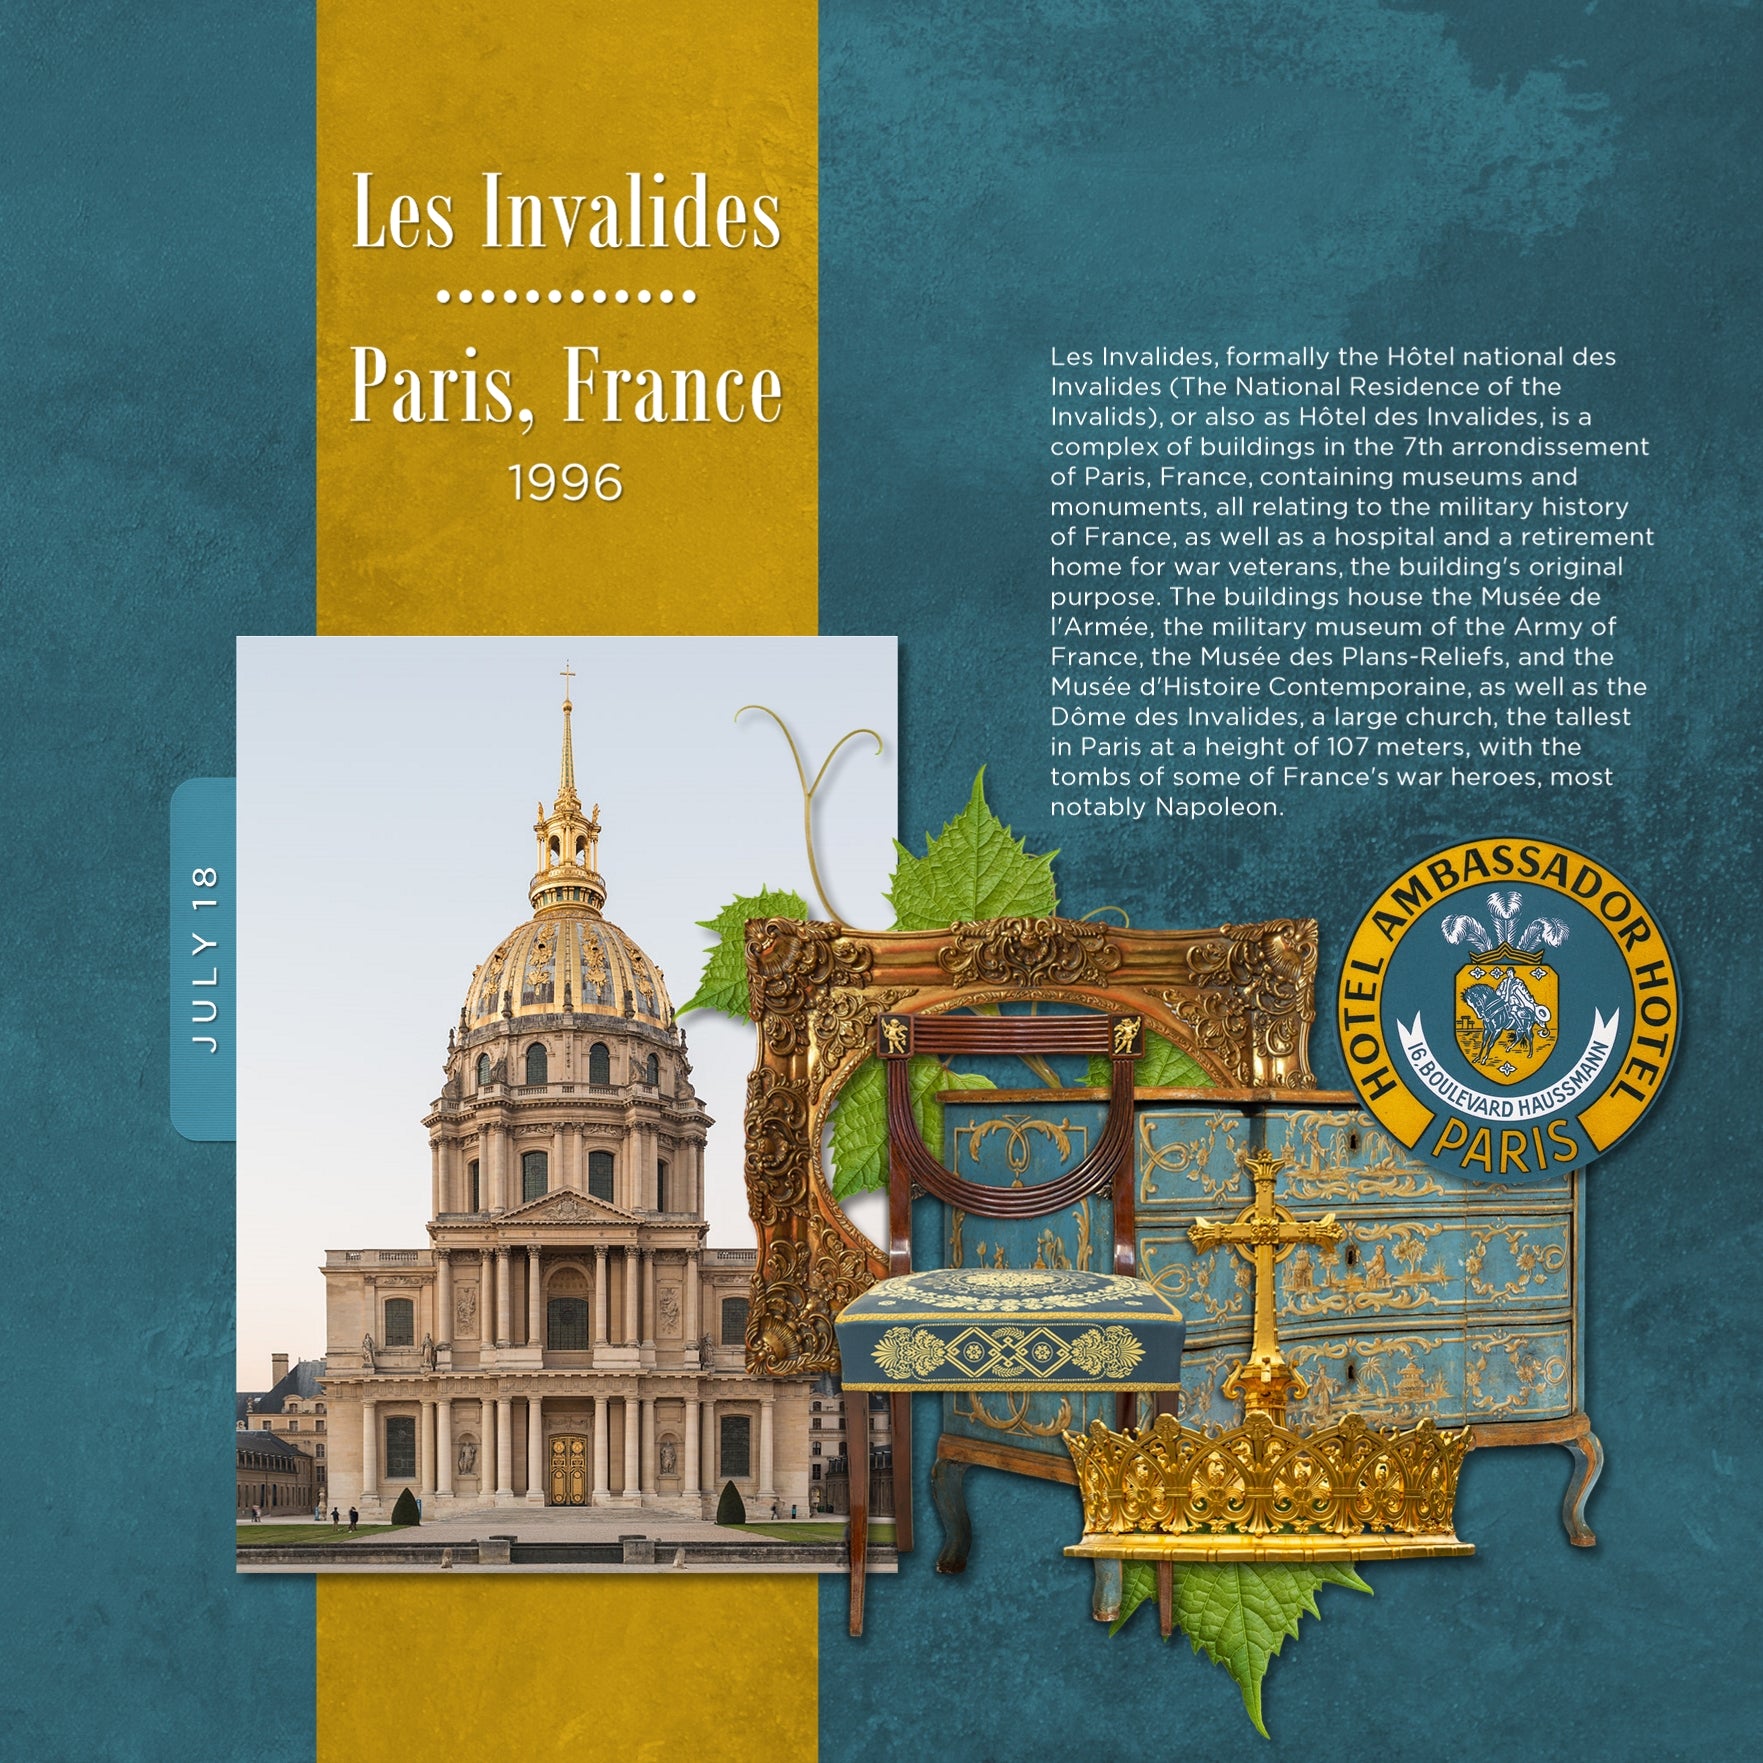 Adventure and explore through France with these beautiful textured, wood, and stone digital art papers. Great for travel and vacations to France and everyday use, too. 